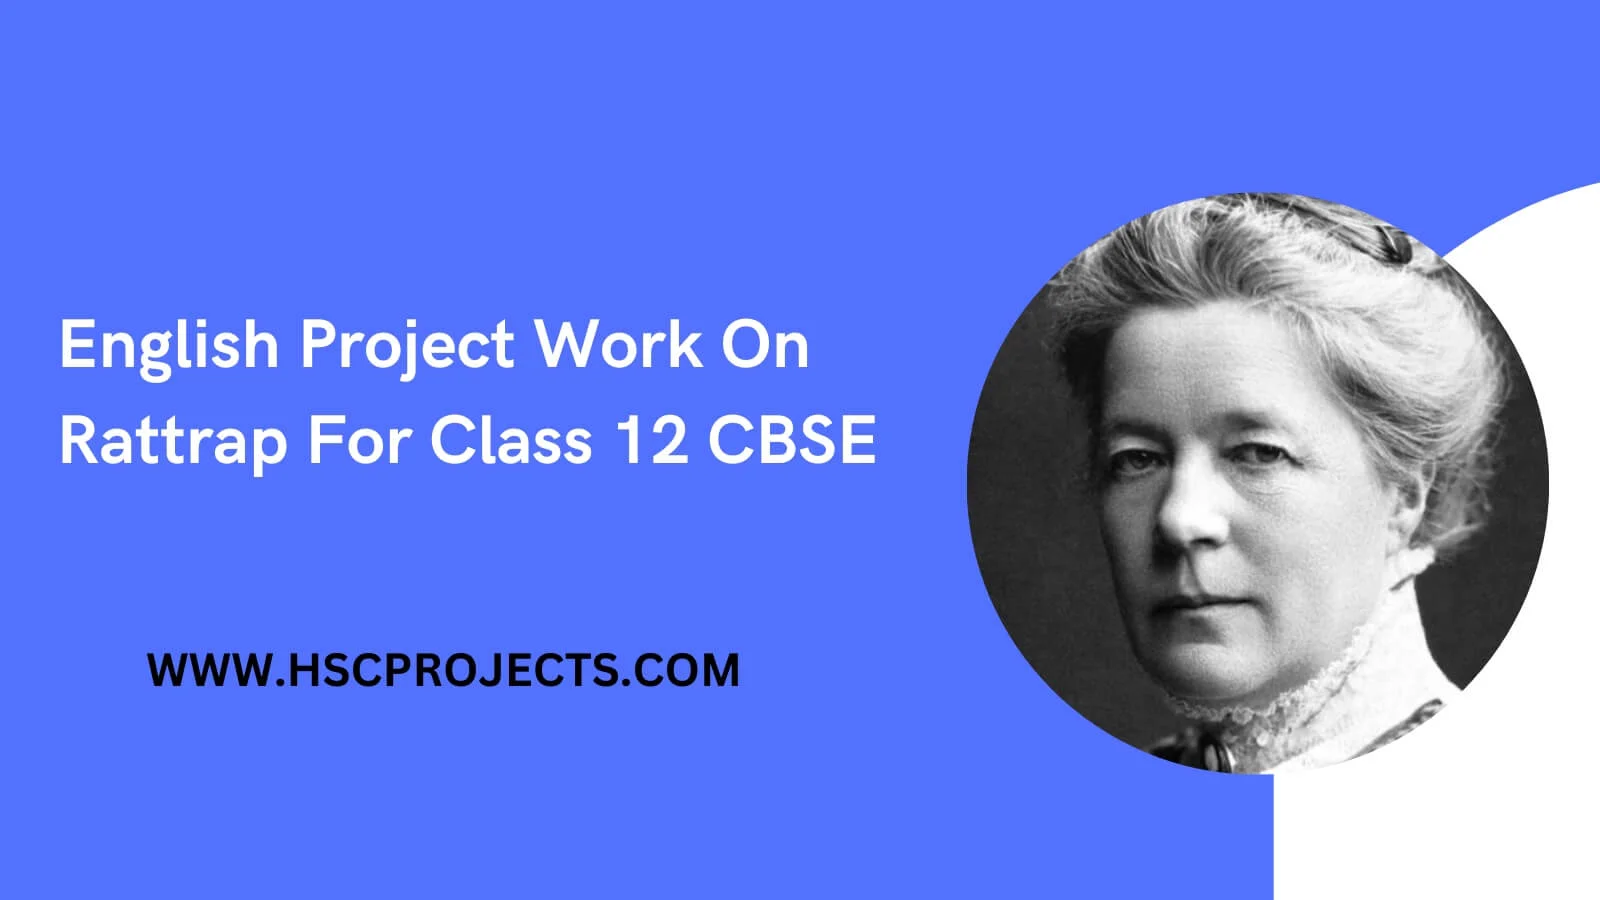 English Project Work On Rattrap - Class 12 CBSE